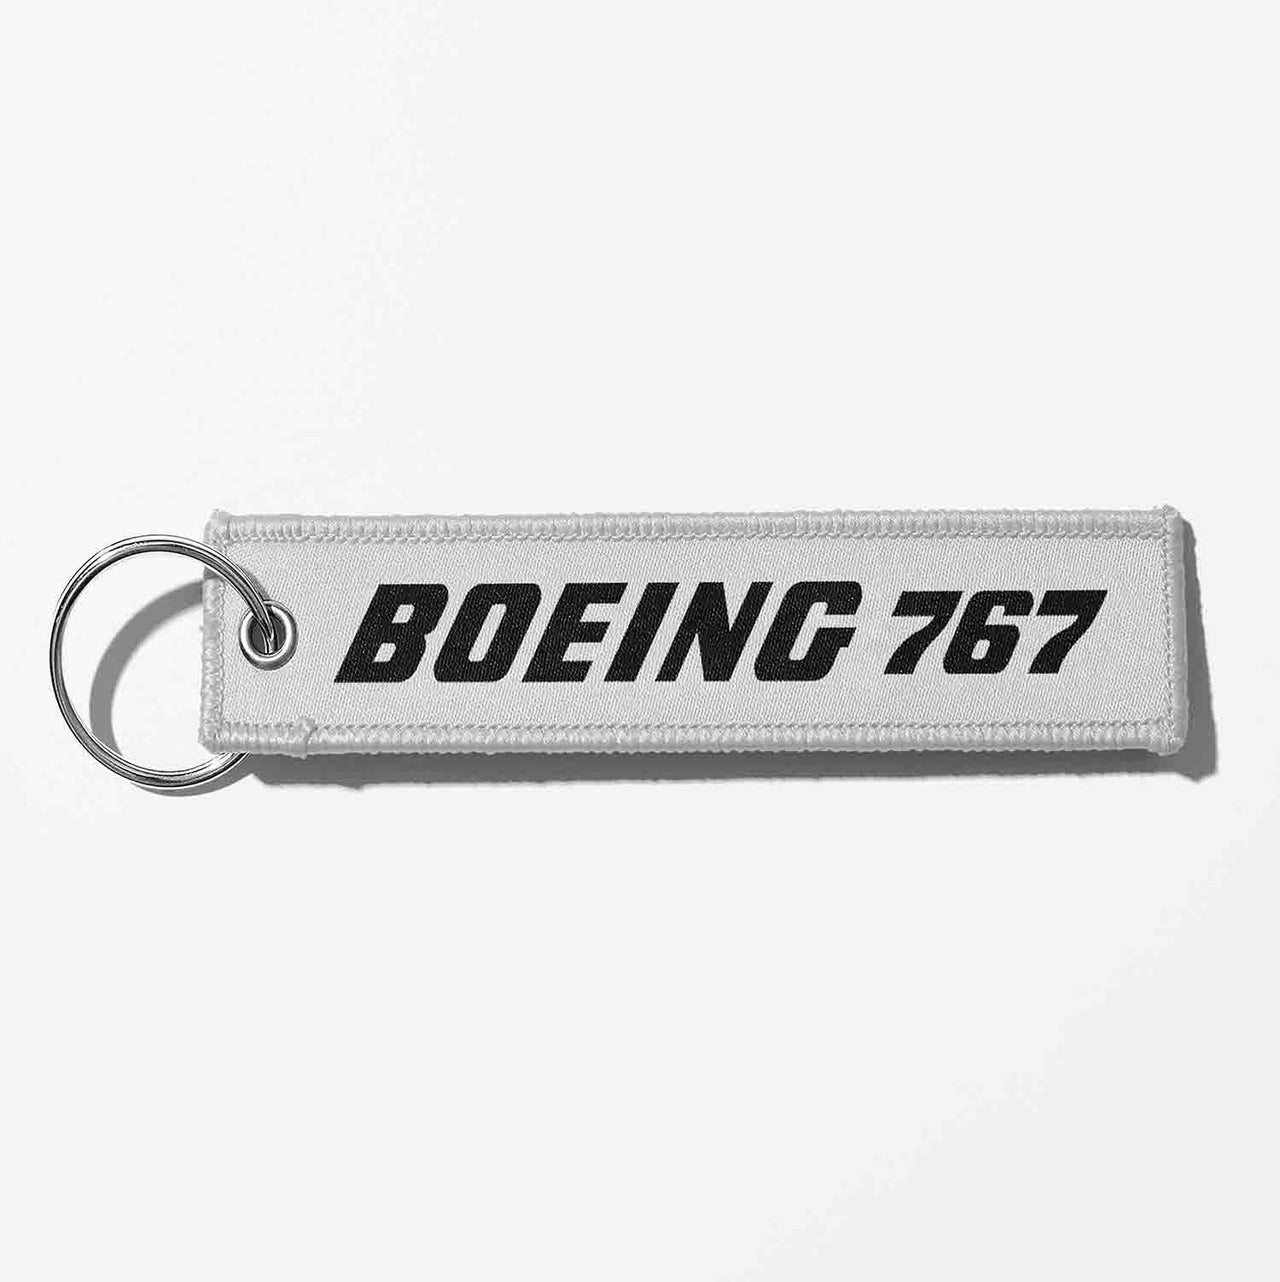 Boeing 767 & Text Designed Key Chains